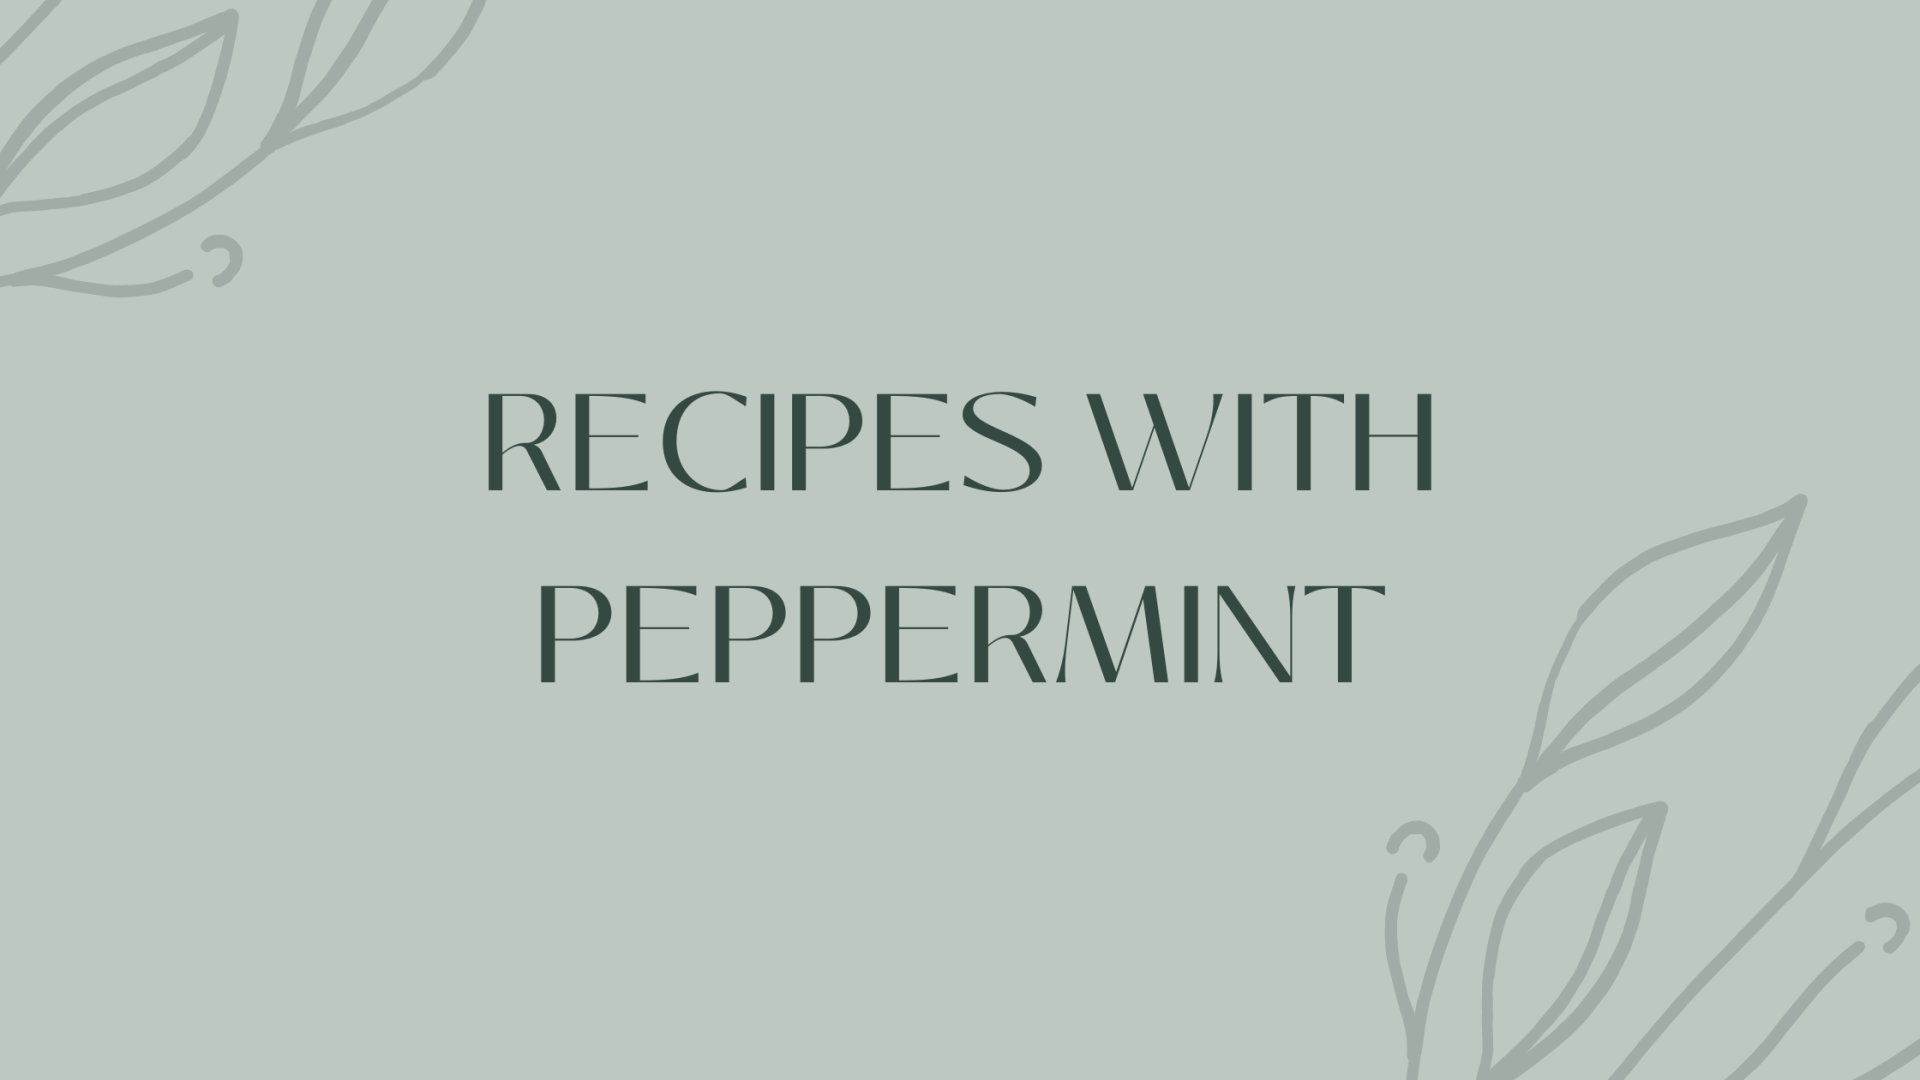 Recipes with Peppermint